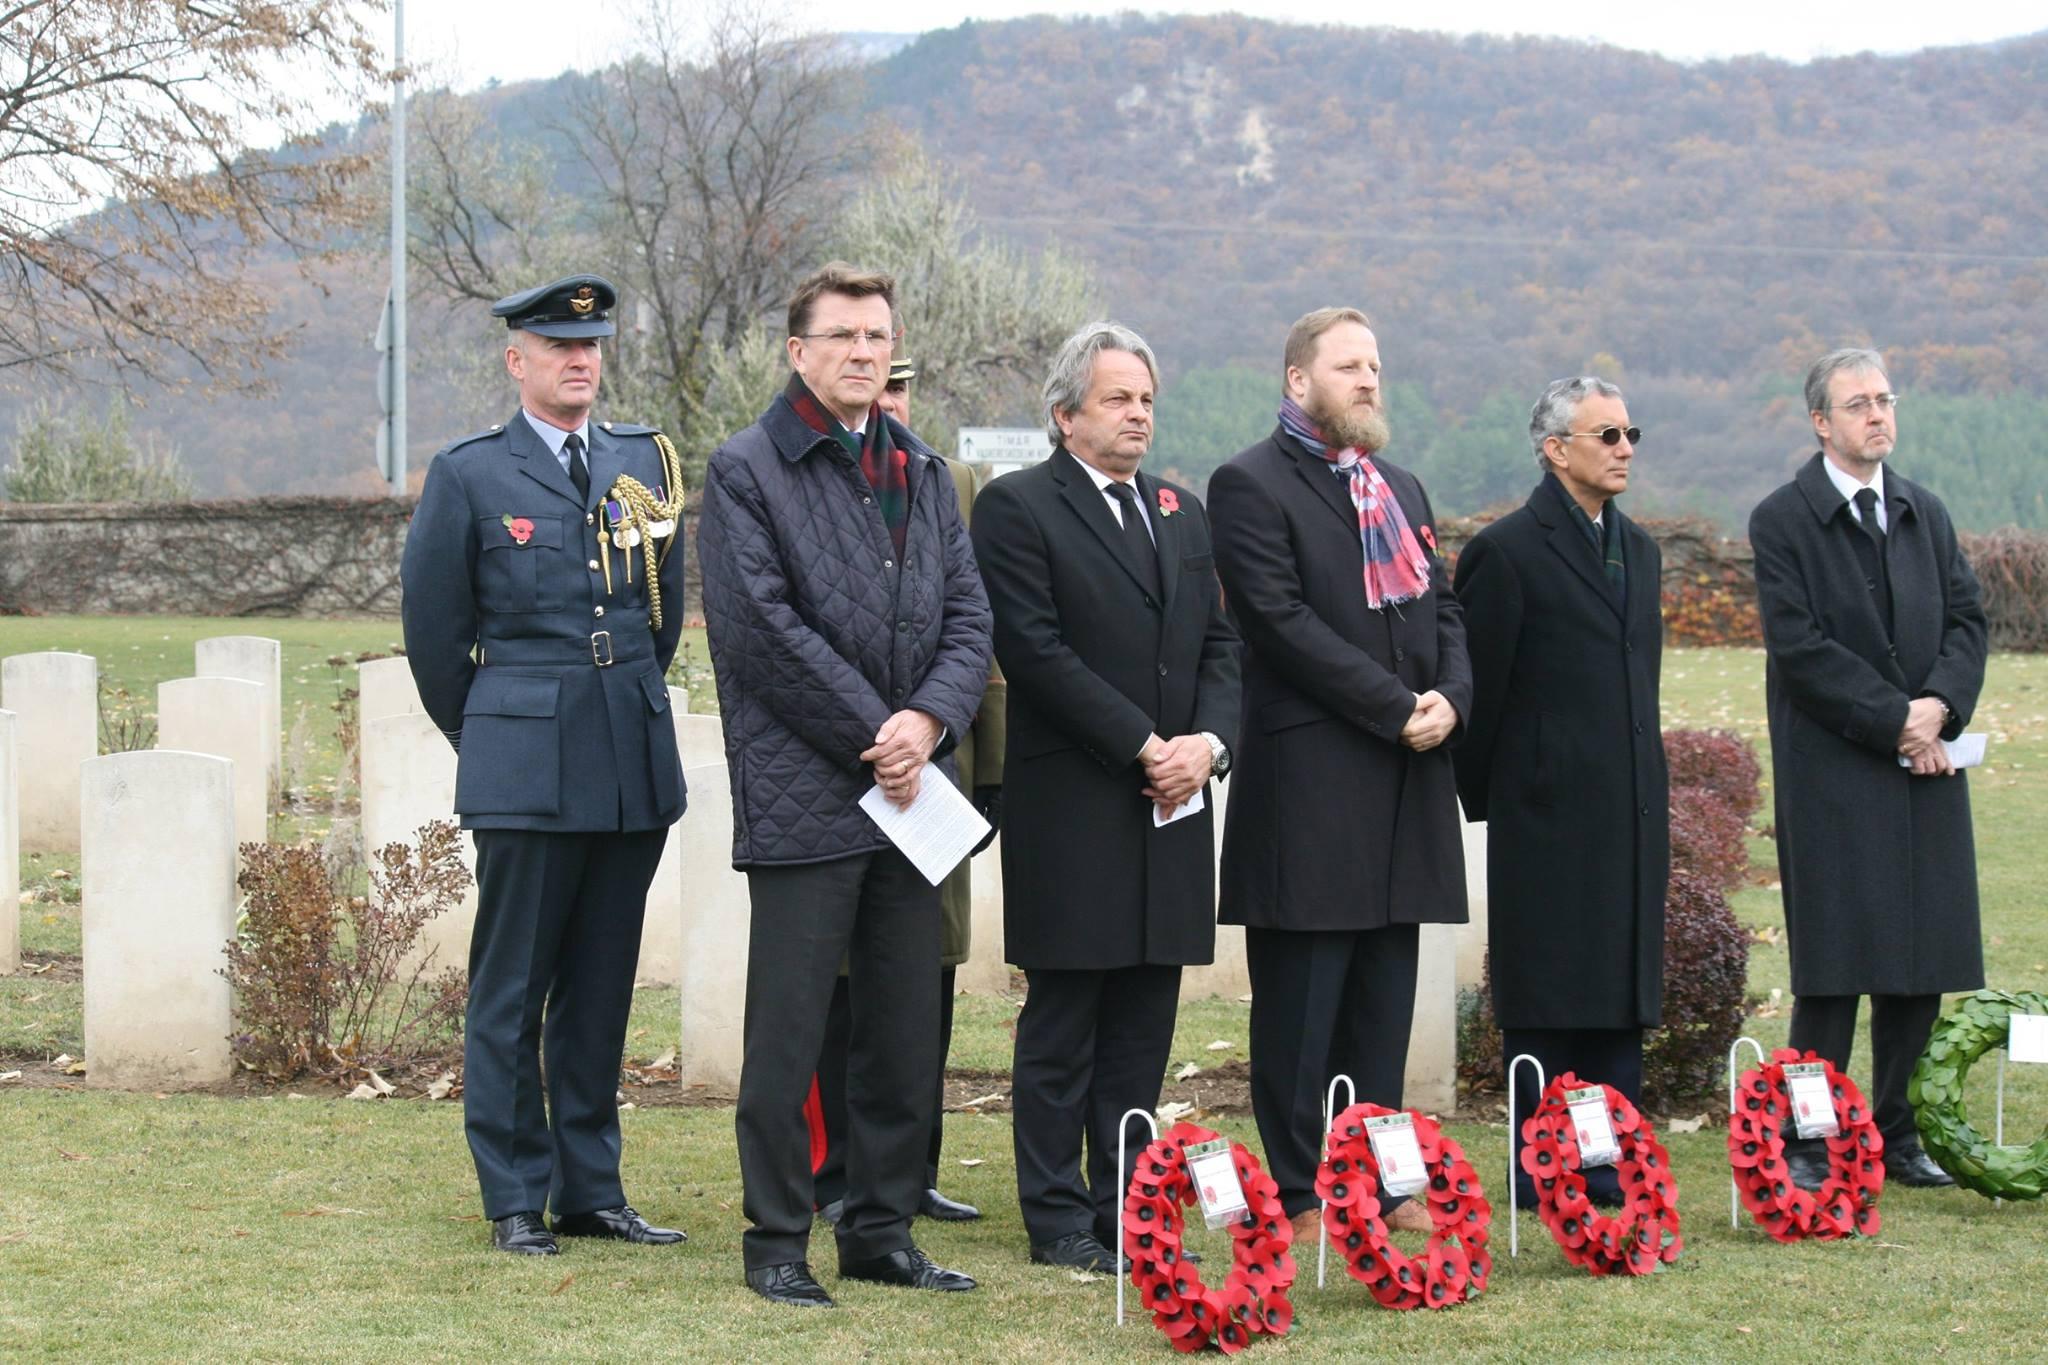 British Annual Remembrance Ceremony In Hungary